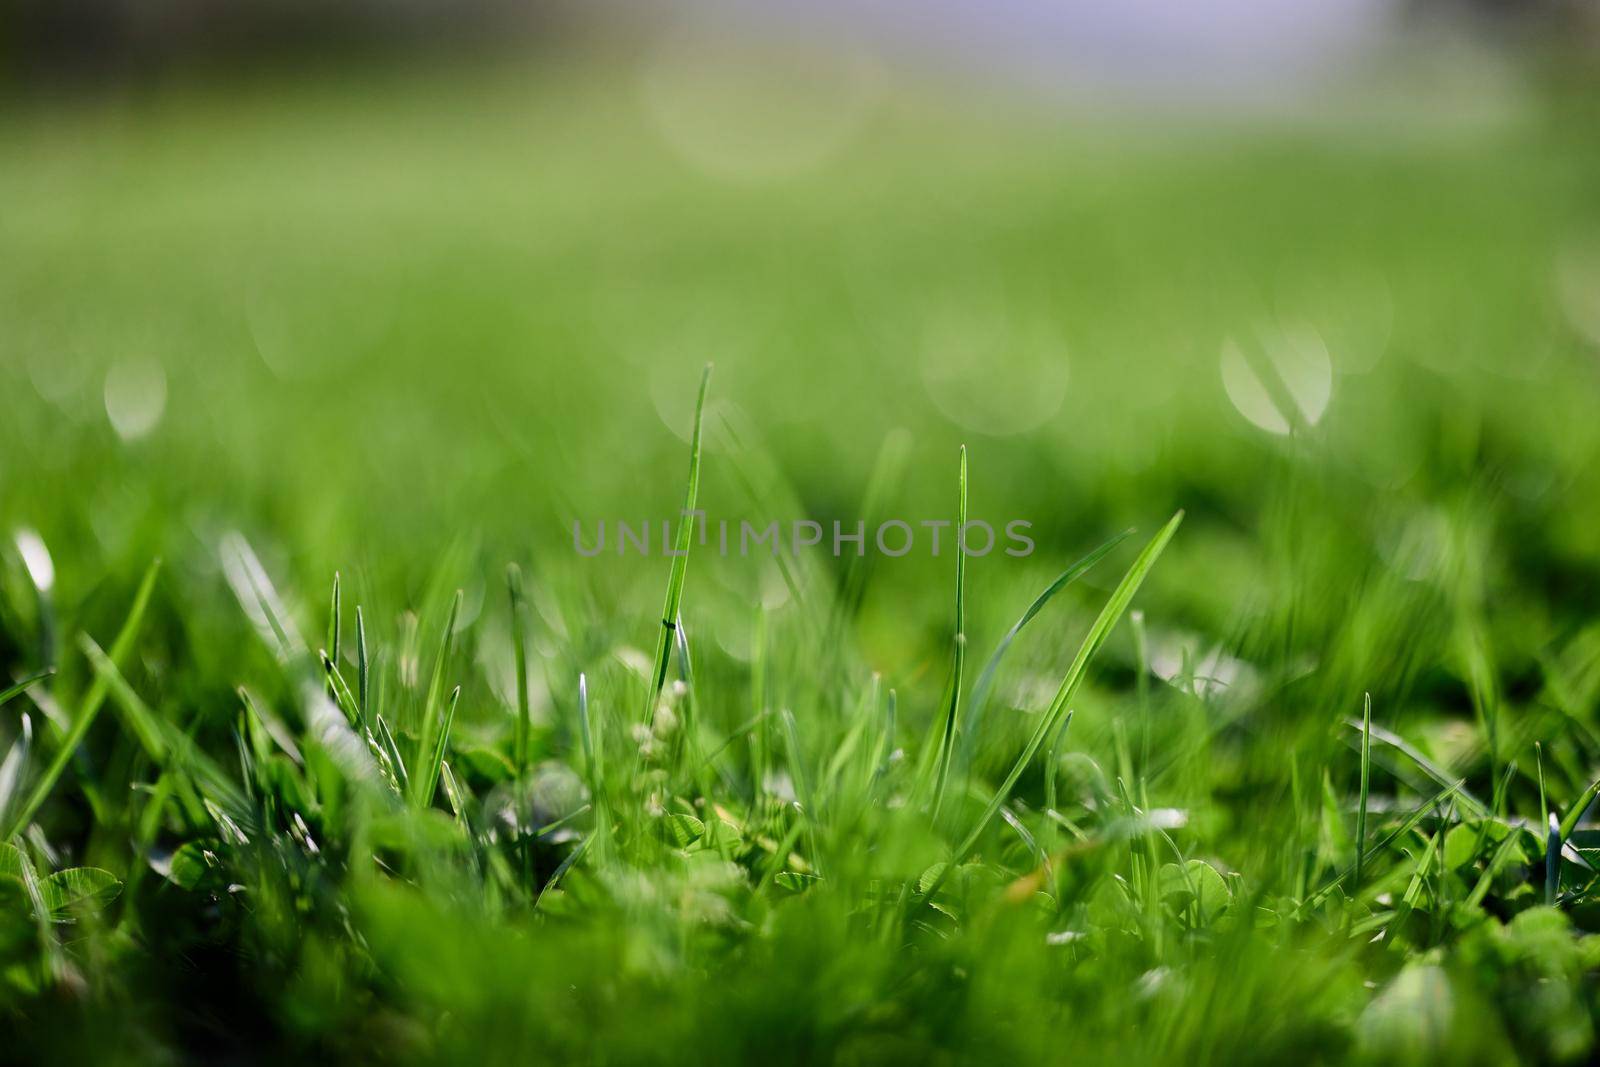 Green lawn grass close-up of the leaves of the grass. Nature conservation without environmental pollution, clean air by SHOTPRIME